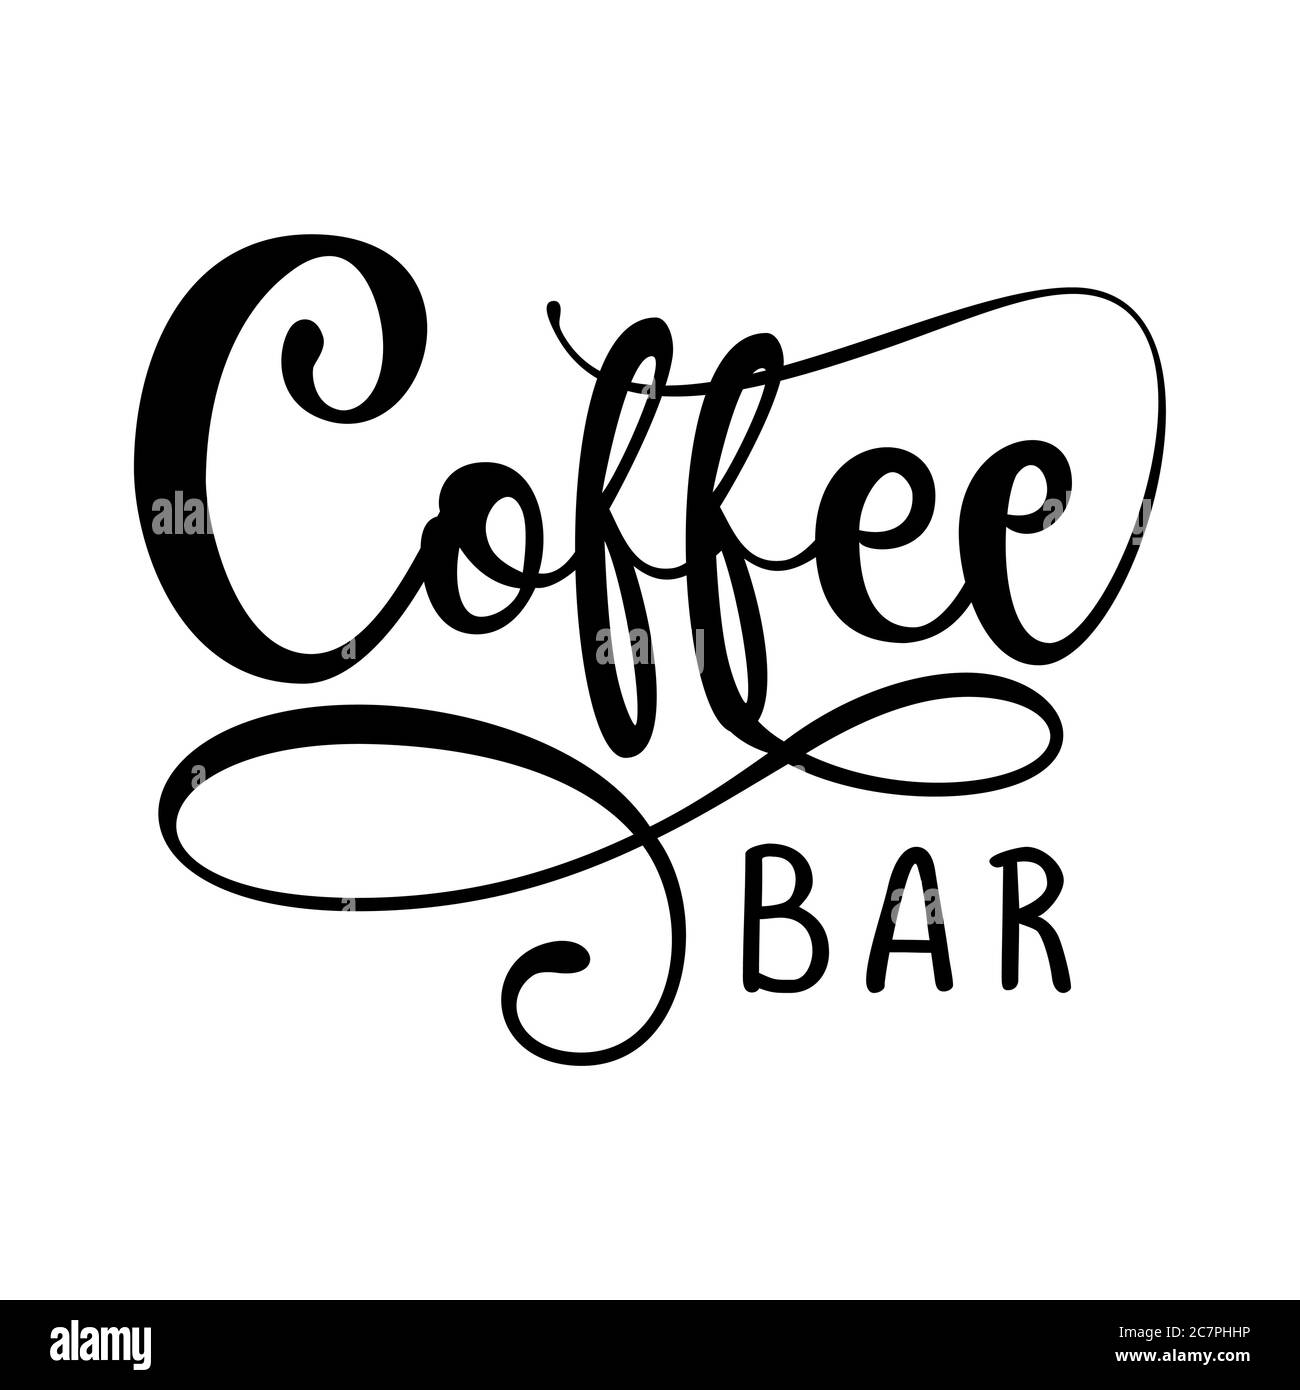 COFFEE bar logo - design for Bars, restaurants, coffe shops, flyers, cards, invitations, stickers, banners. Hand painted brush pen modern calligraphy Stock Vector